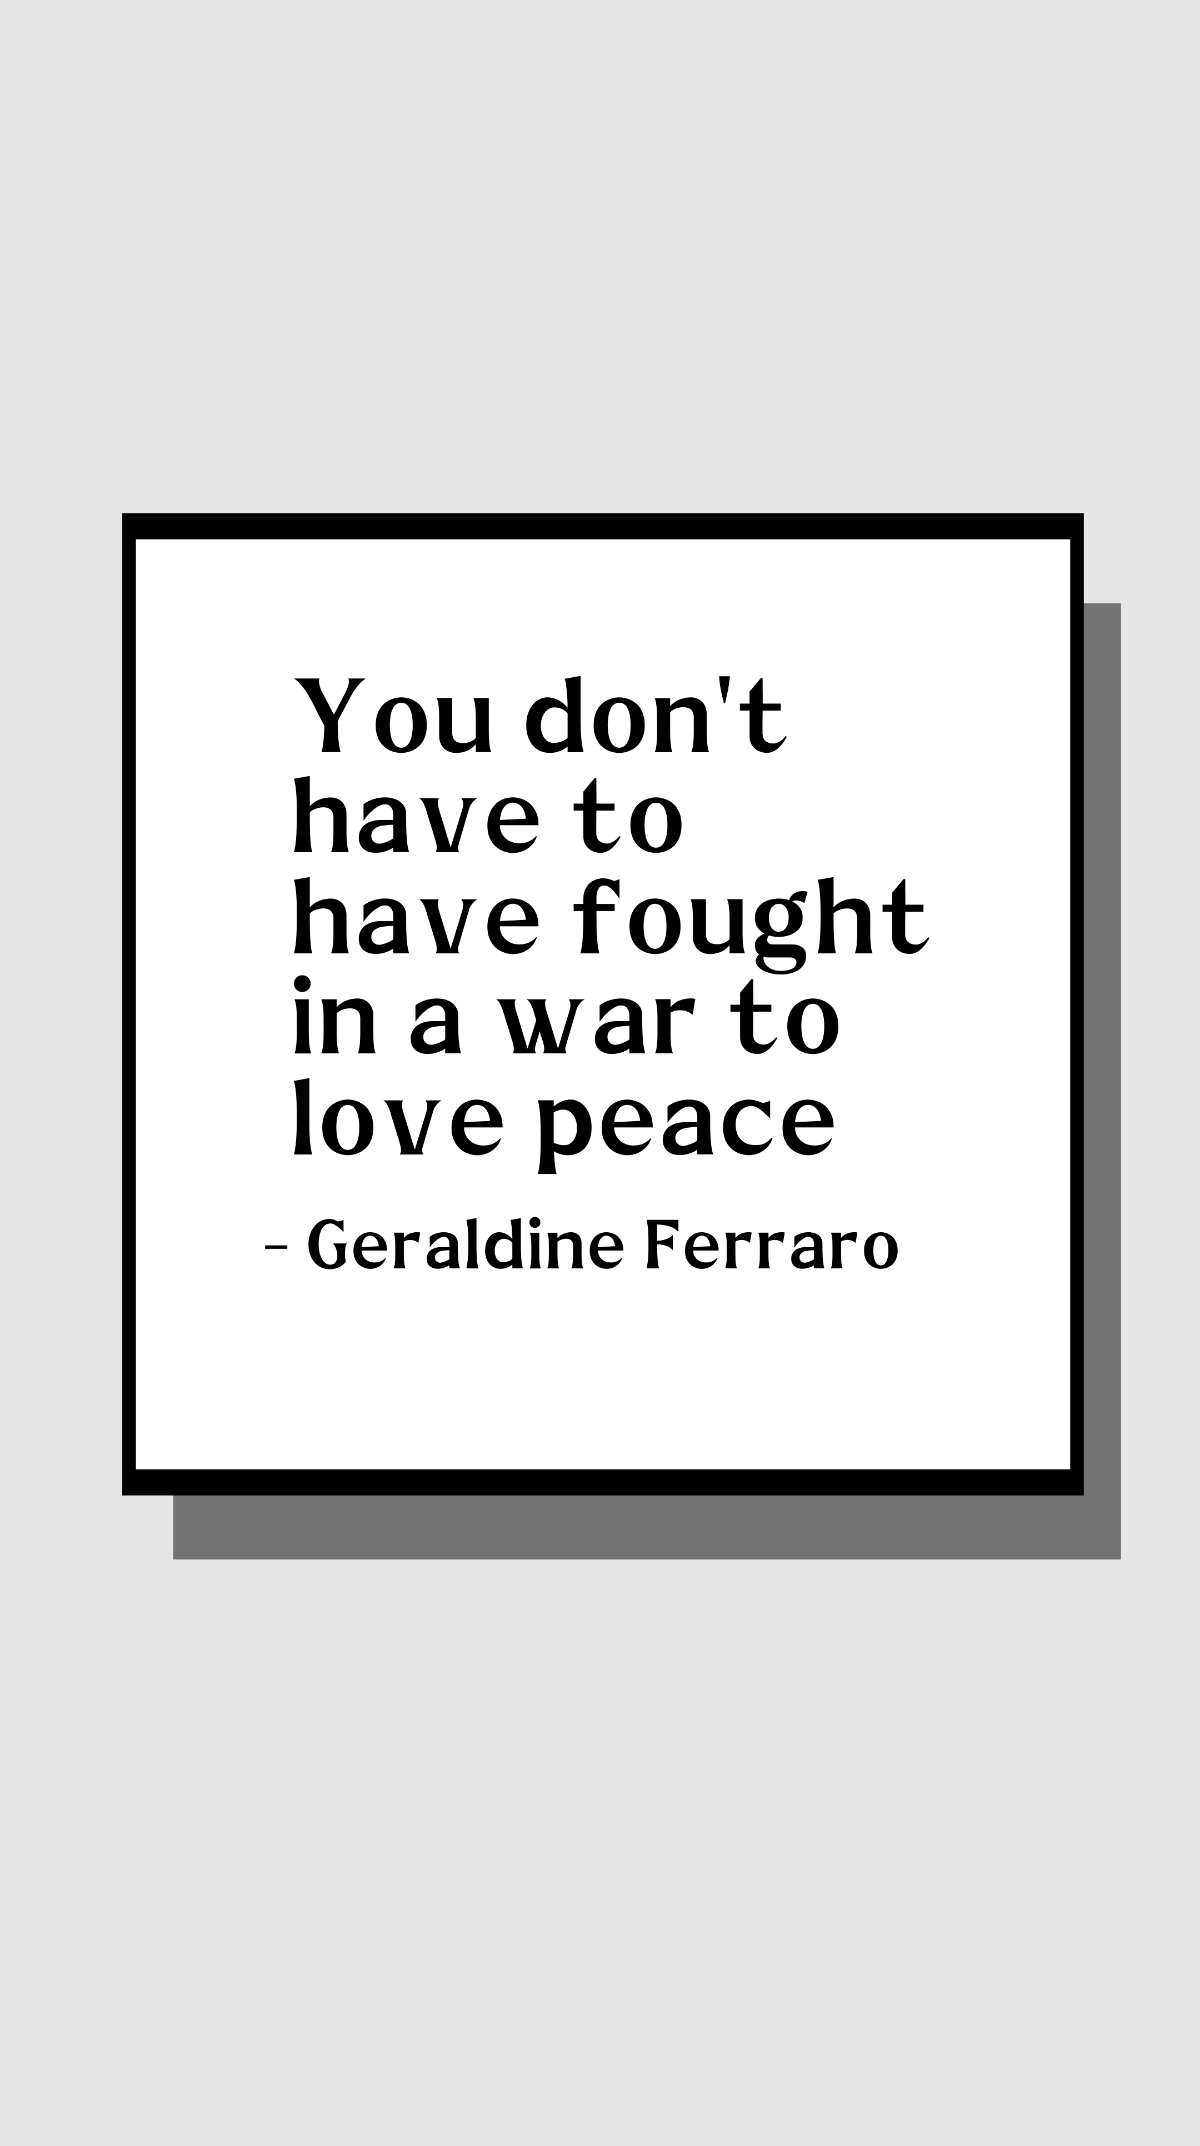 Geraldine Ferraro - You don't have to have fought in a war to love peace Template